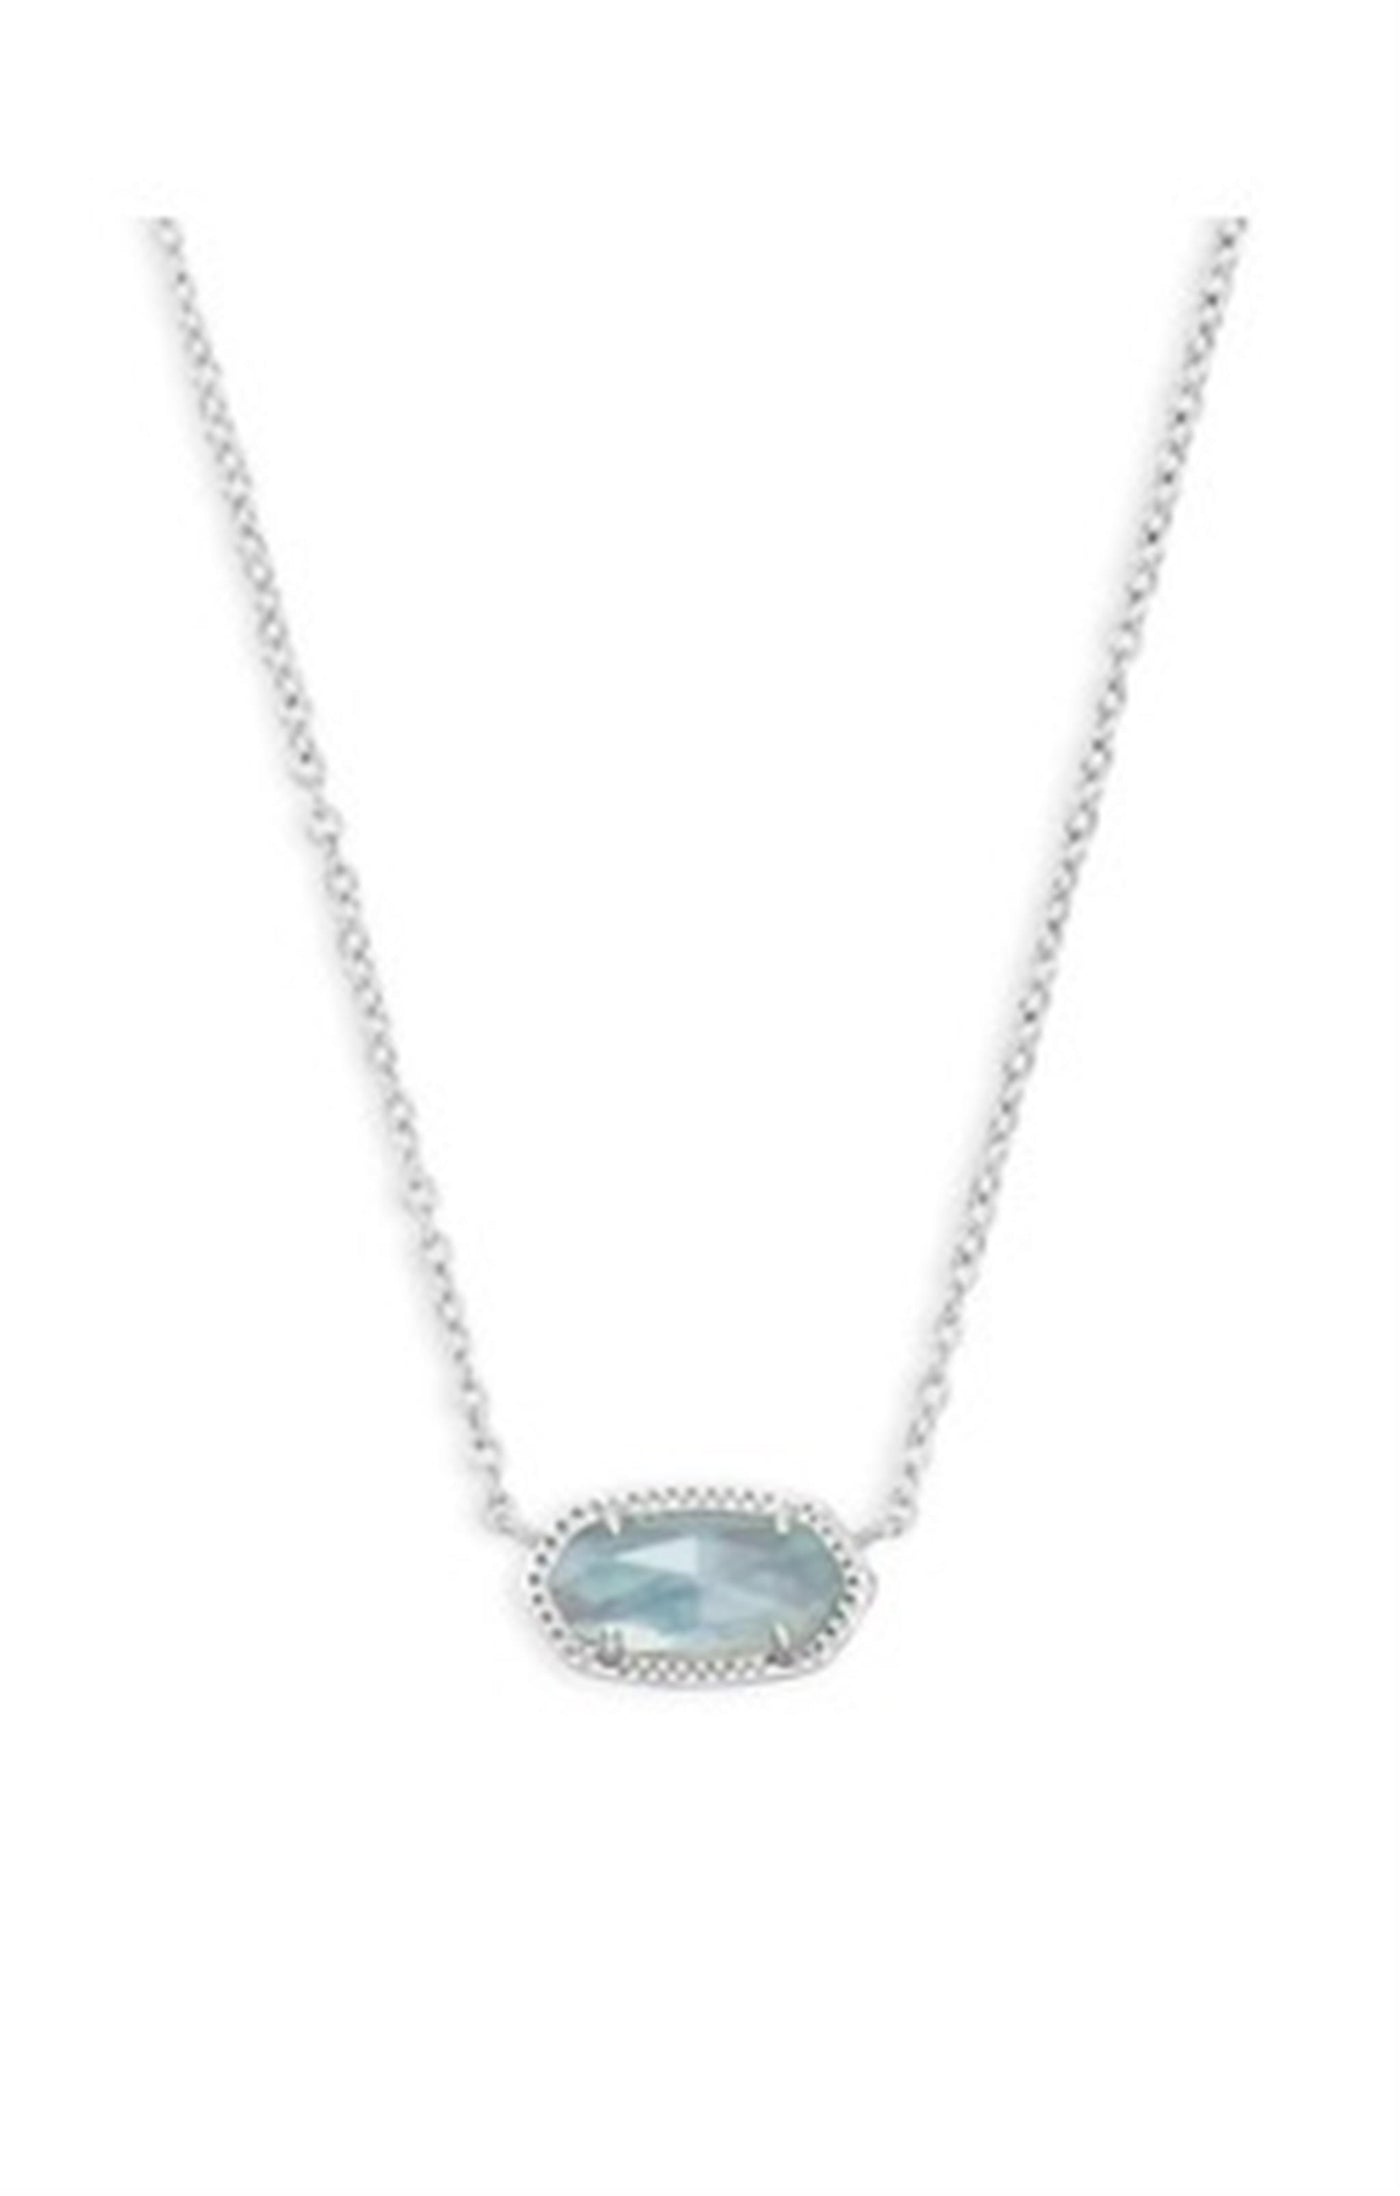 Silver Tone Necklace Featuring Light Blue Illusion by Kendra Scott